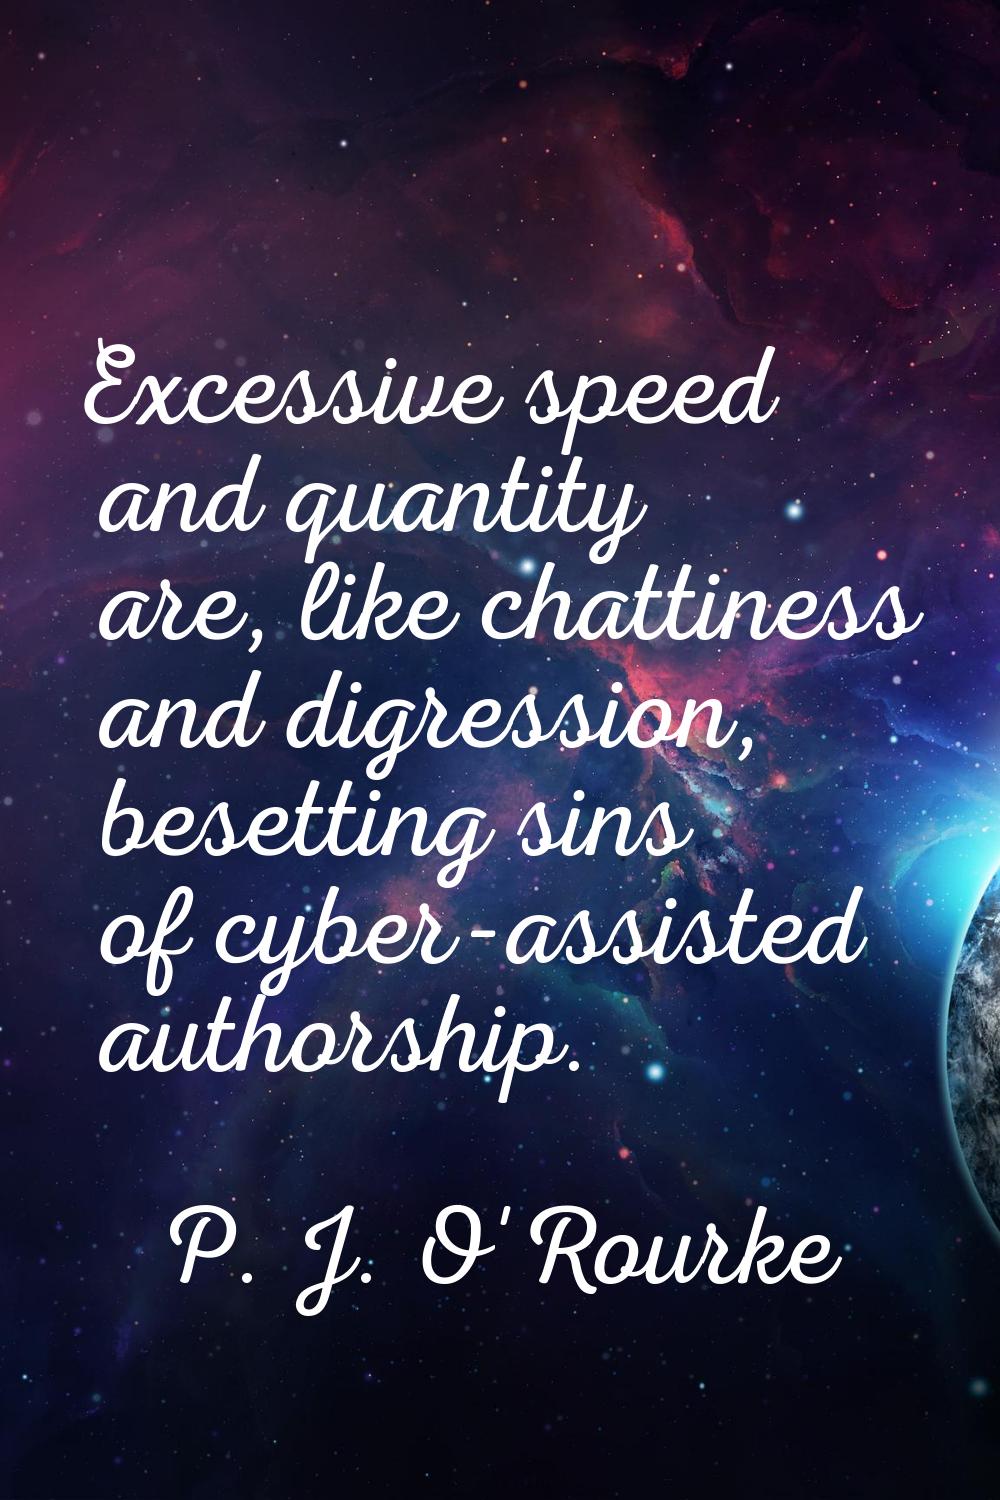 Excessive speed and quantity are, like chattiness and digression, besetting sins of cyber-assisted 